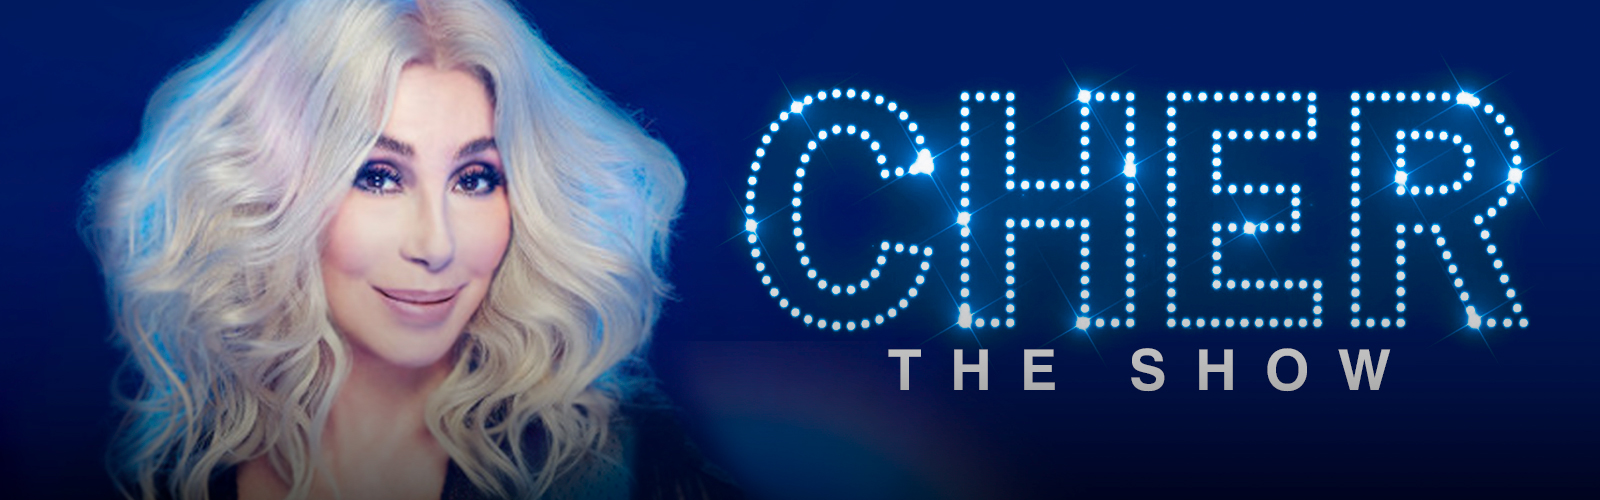 CHER, THE SHOW